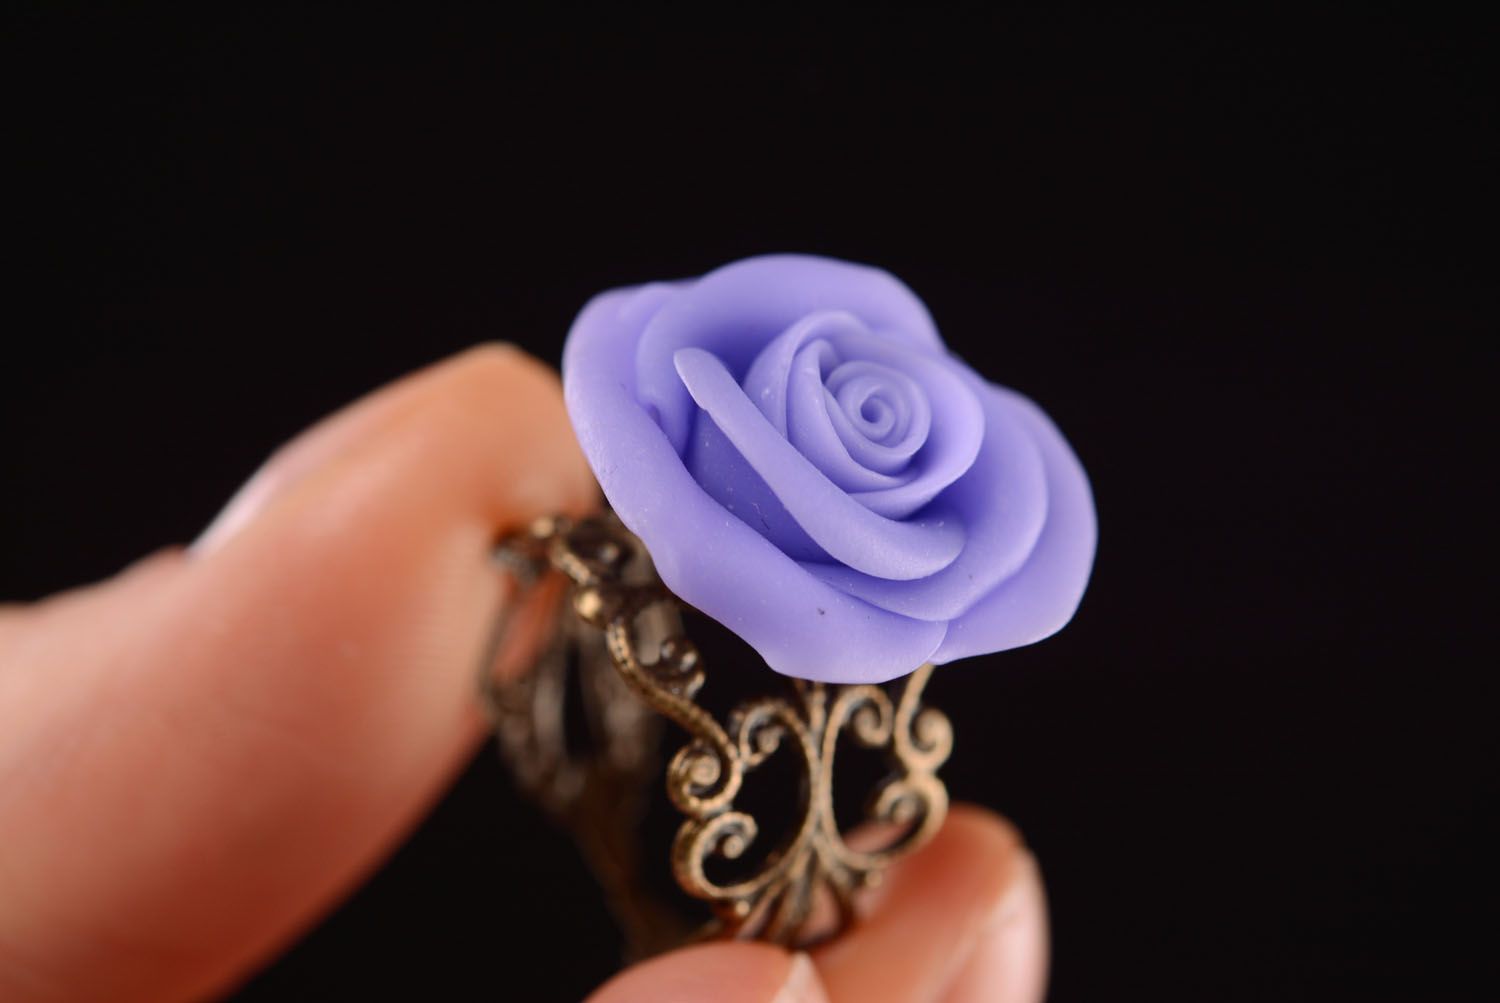 Polymer clay flower ring photo 2